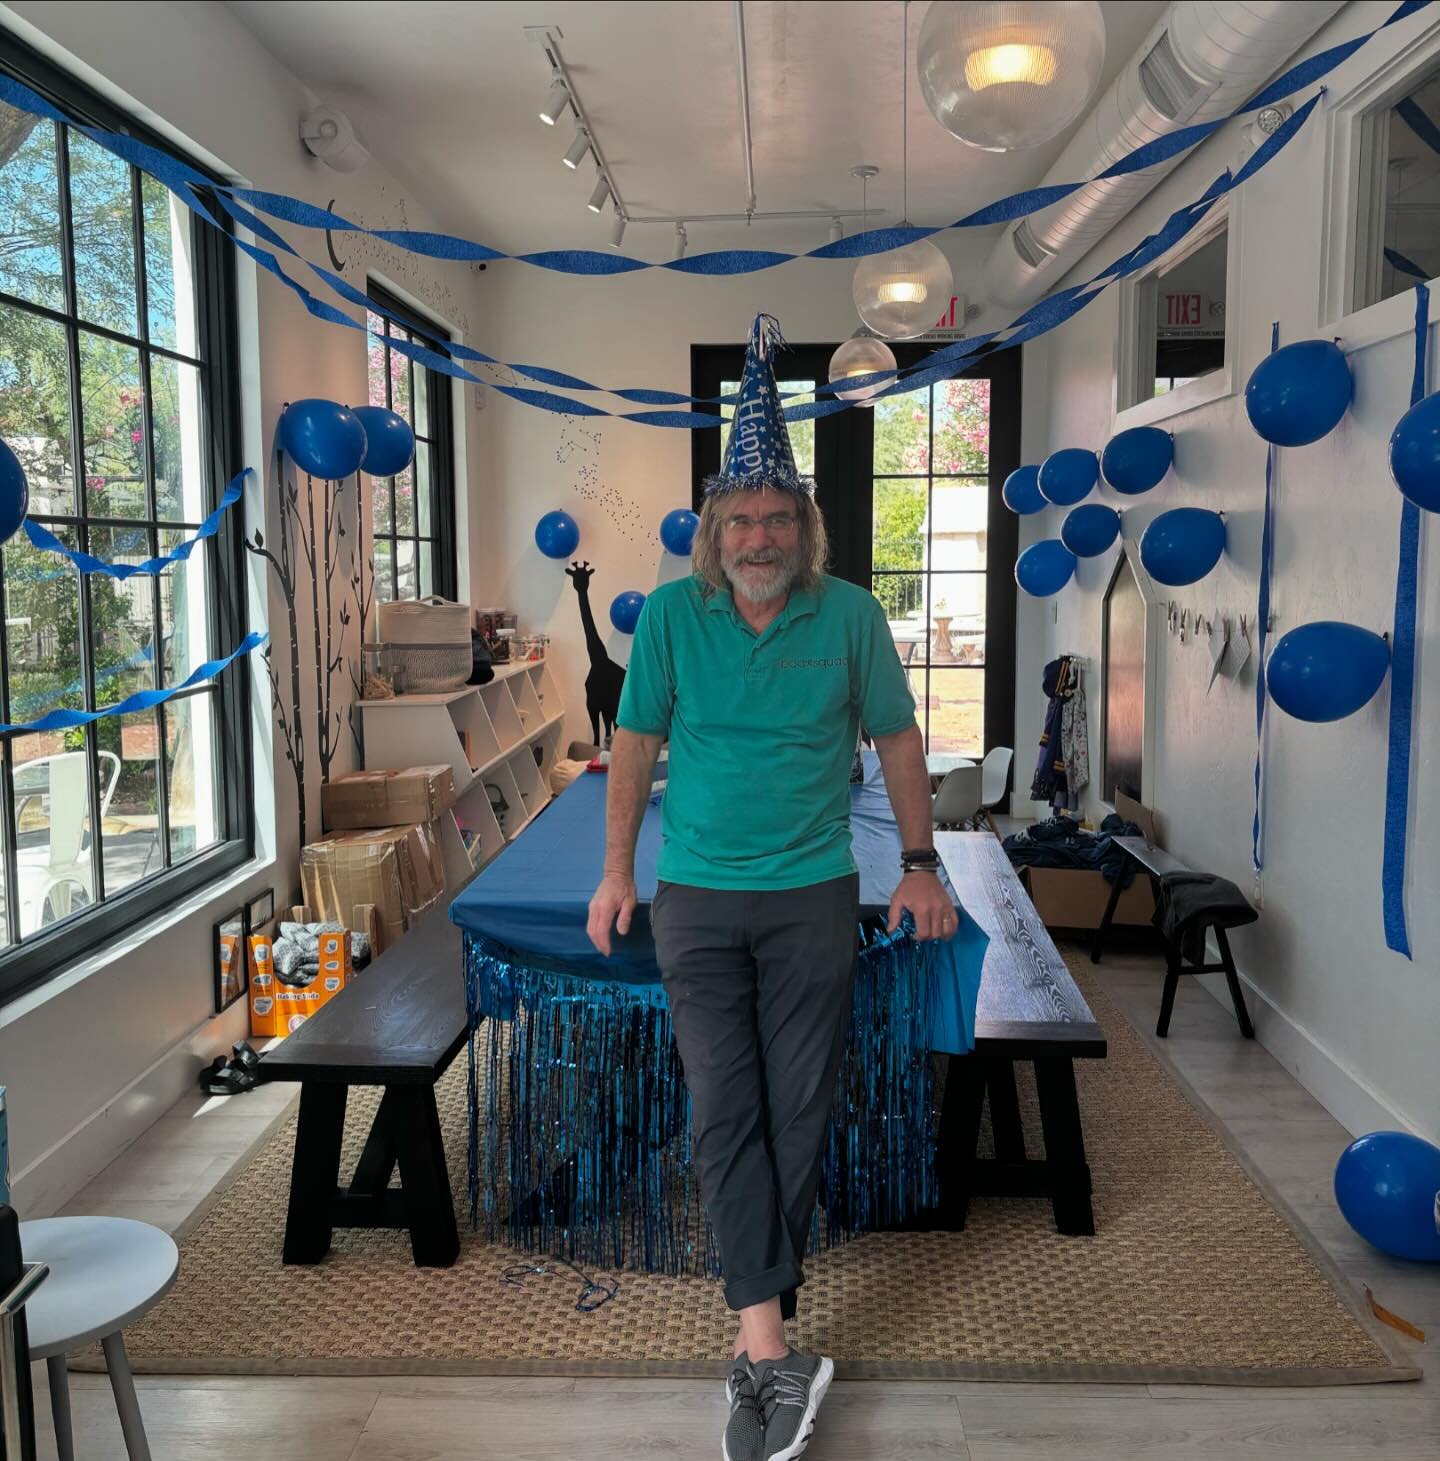 HAPPY BIRTHDAY BRIAN!! 🎉🥳 We love you to the moon and back!! 65 is lucky to have you and so are we. Your laugh, kindness, and energy lights up our space everyday ☀️ Here&rsquo;s to another amzazing year 💙